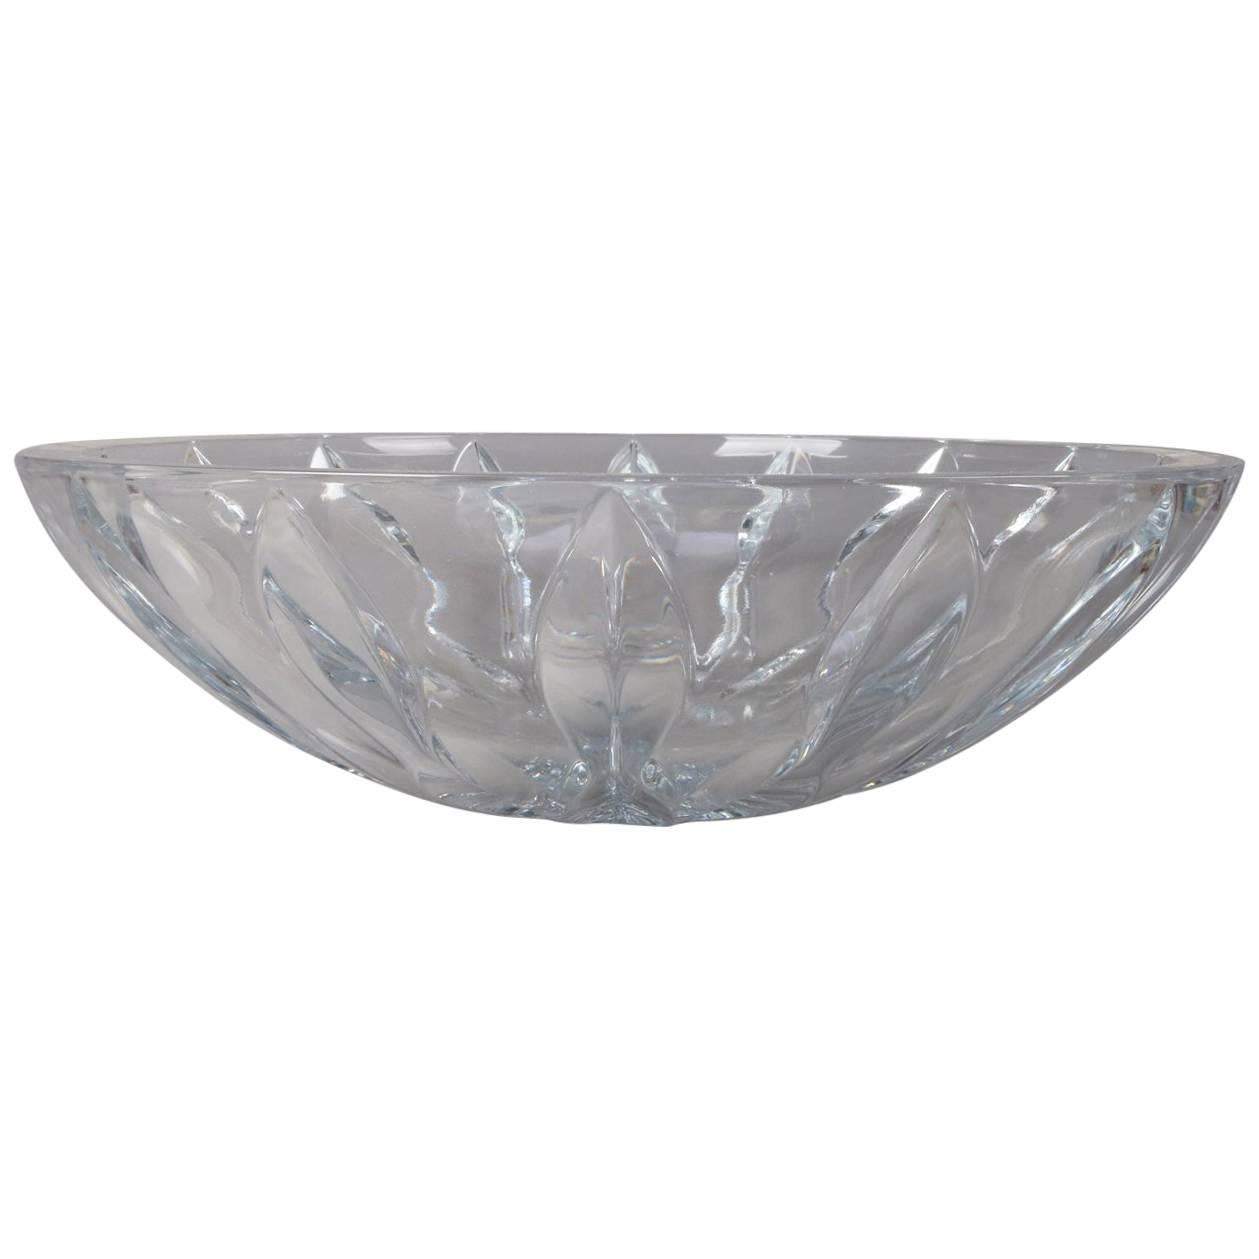 Equinox Clear Crystal Centerpiece Bowl by Reed & Barton, 20th Century For Sale